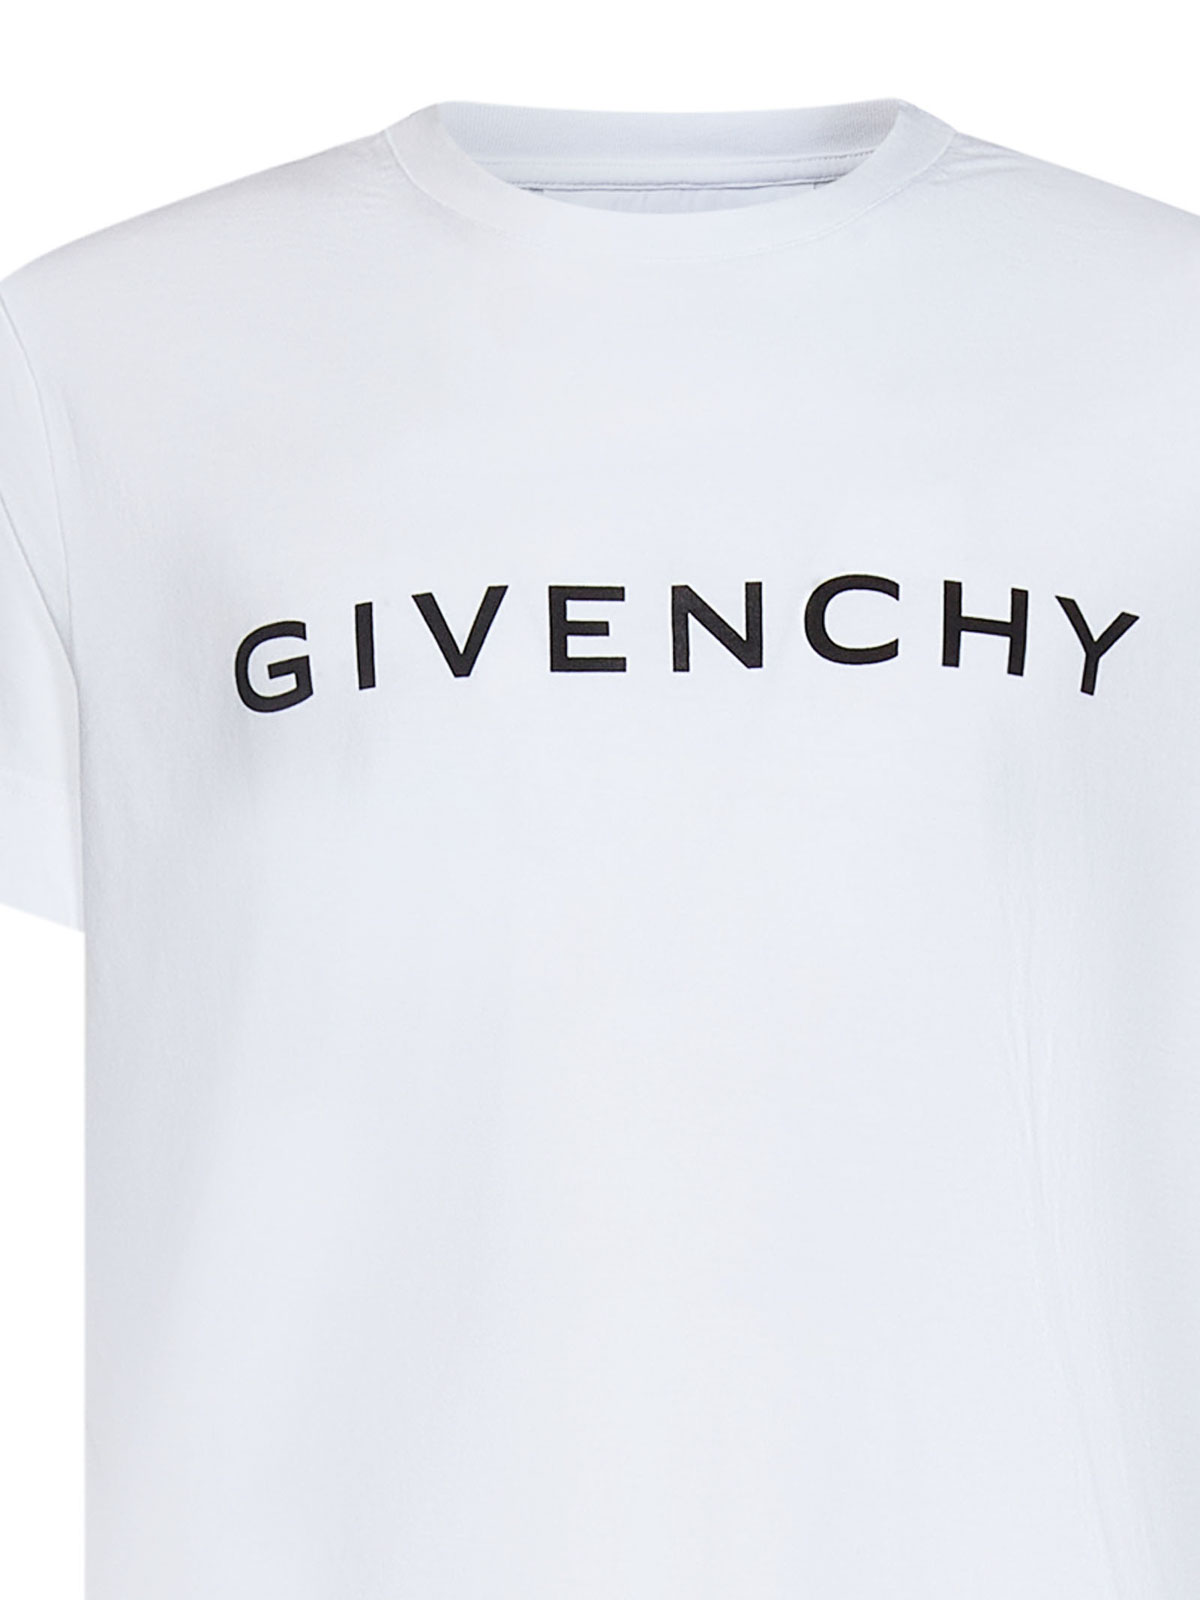 Tシャツ Givenchy - Tシャツ - 白 - BW707Z3YAC100 | THEBS